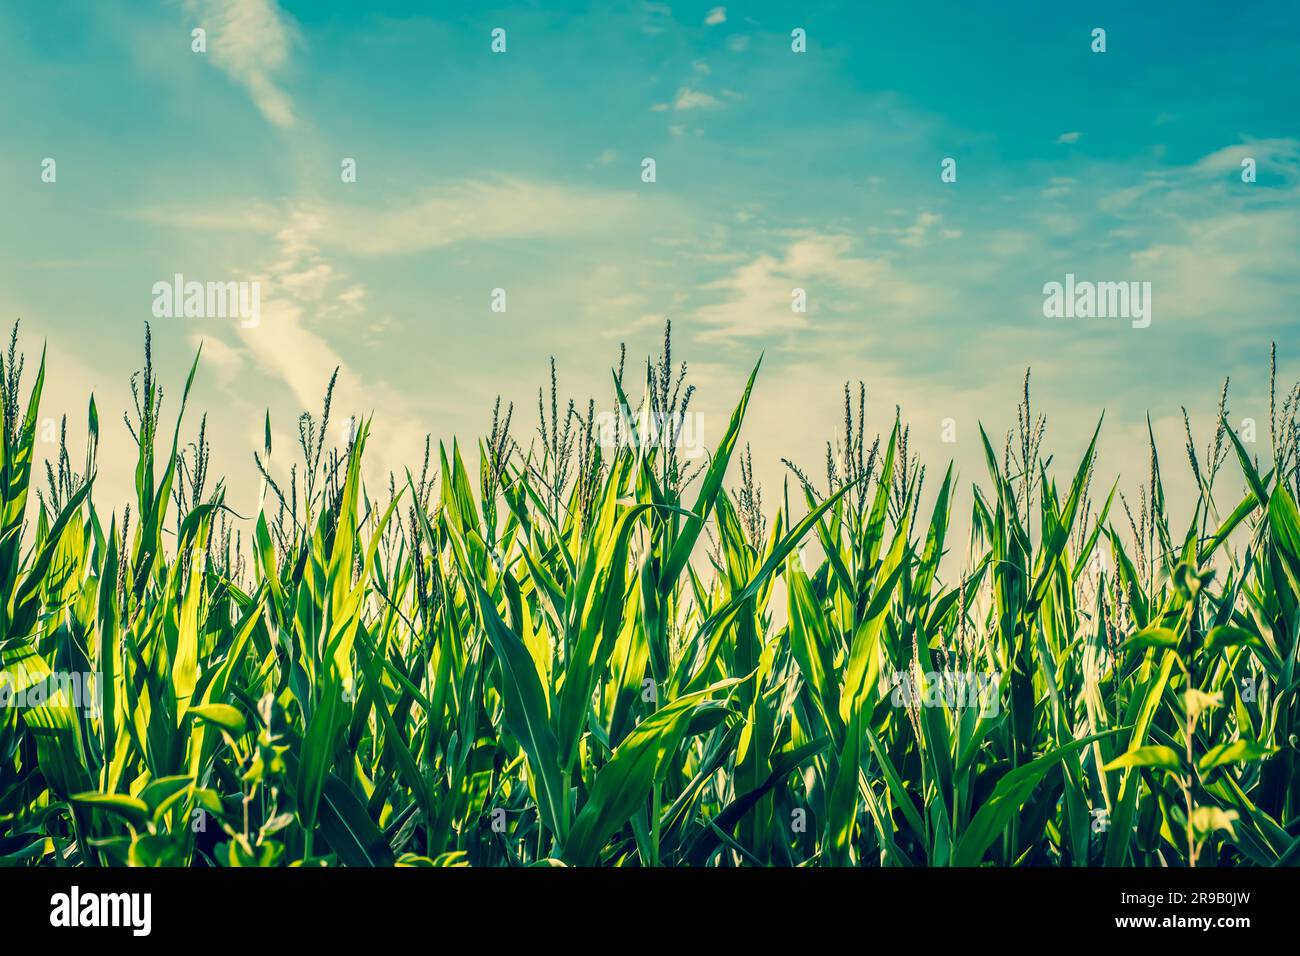 Tall green corn crops with blue sky Stock Photo